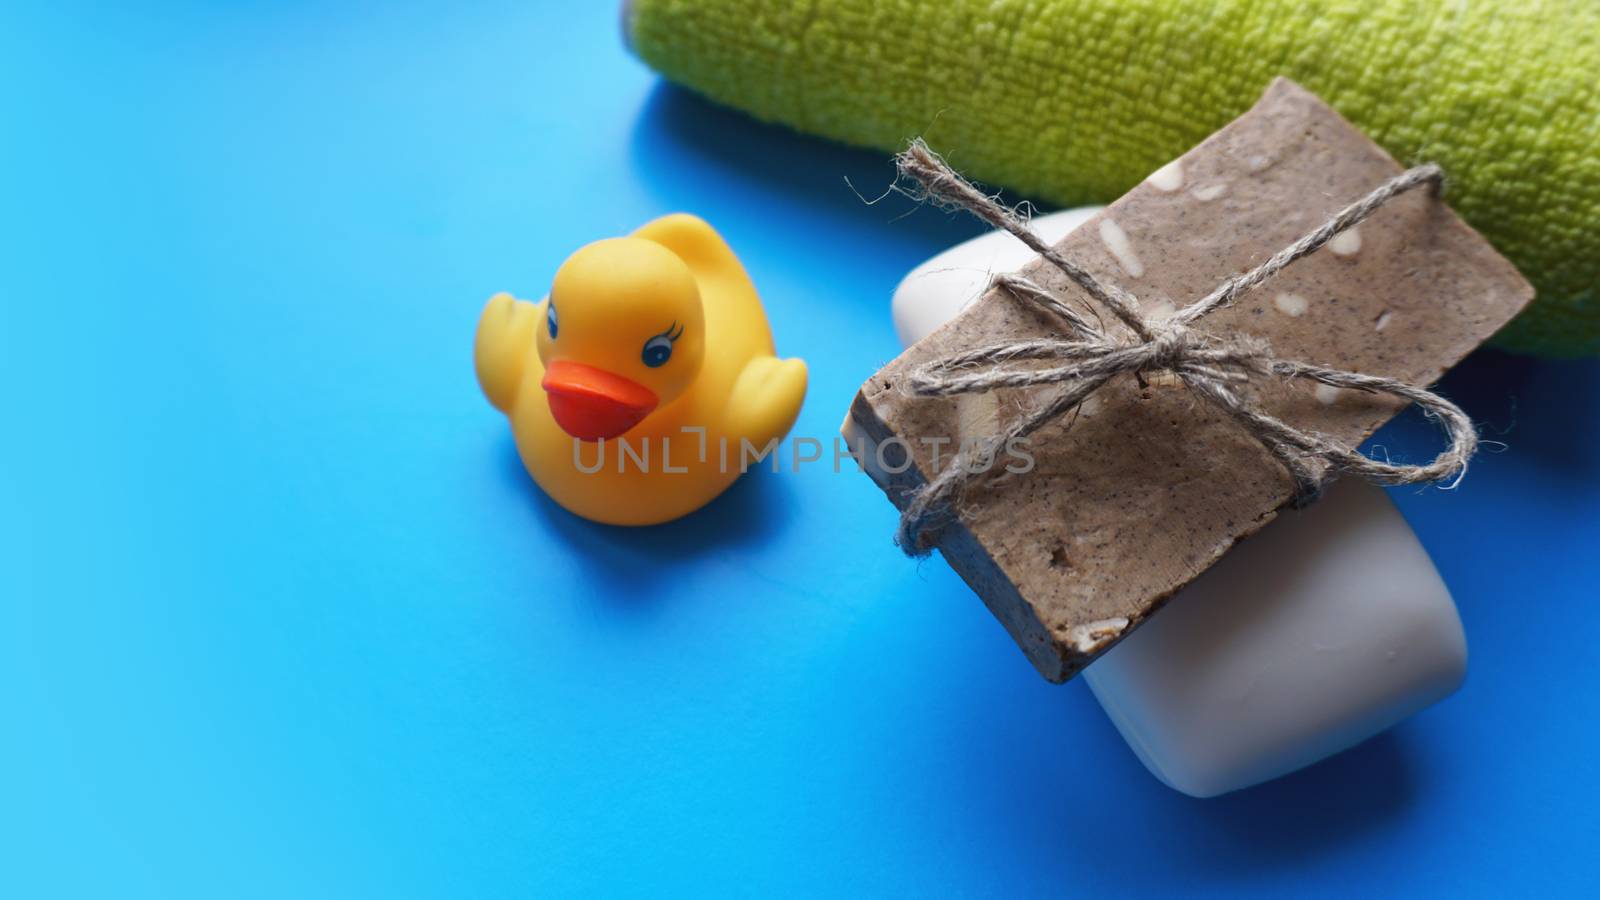 Terry towel, Gray and white Handmade soap and yellow toy duck on a blue background. Flat lay photo, top view